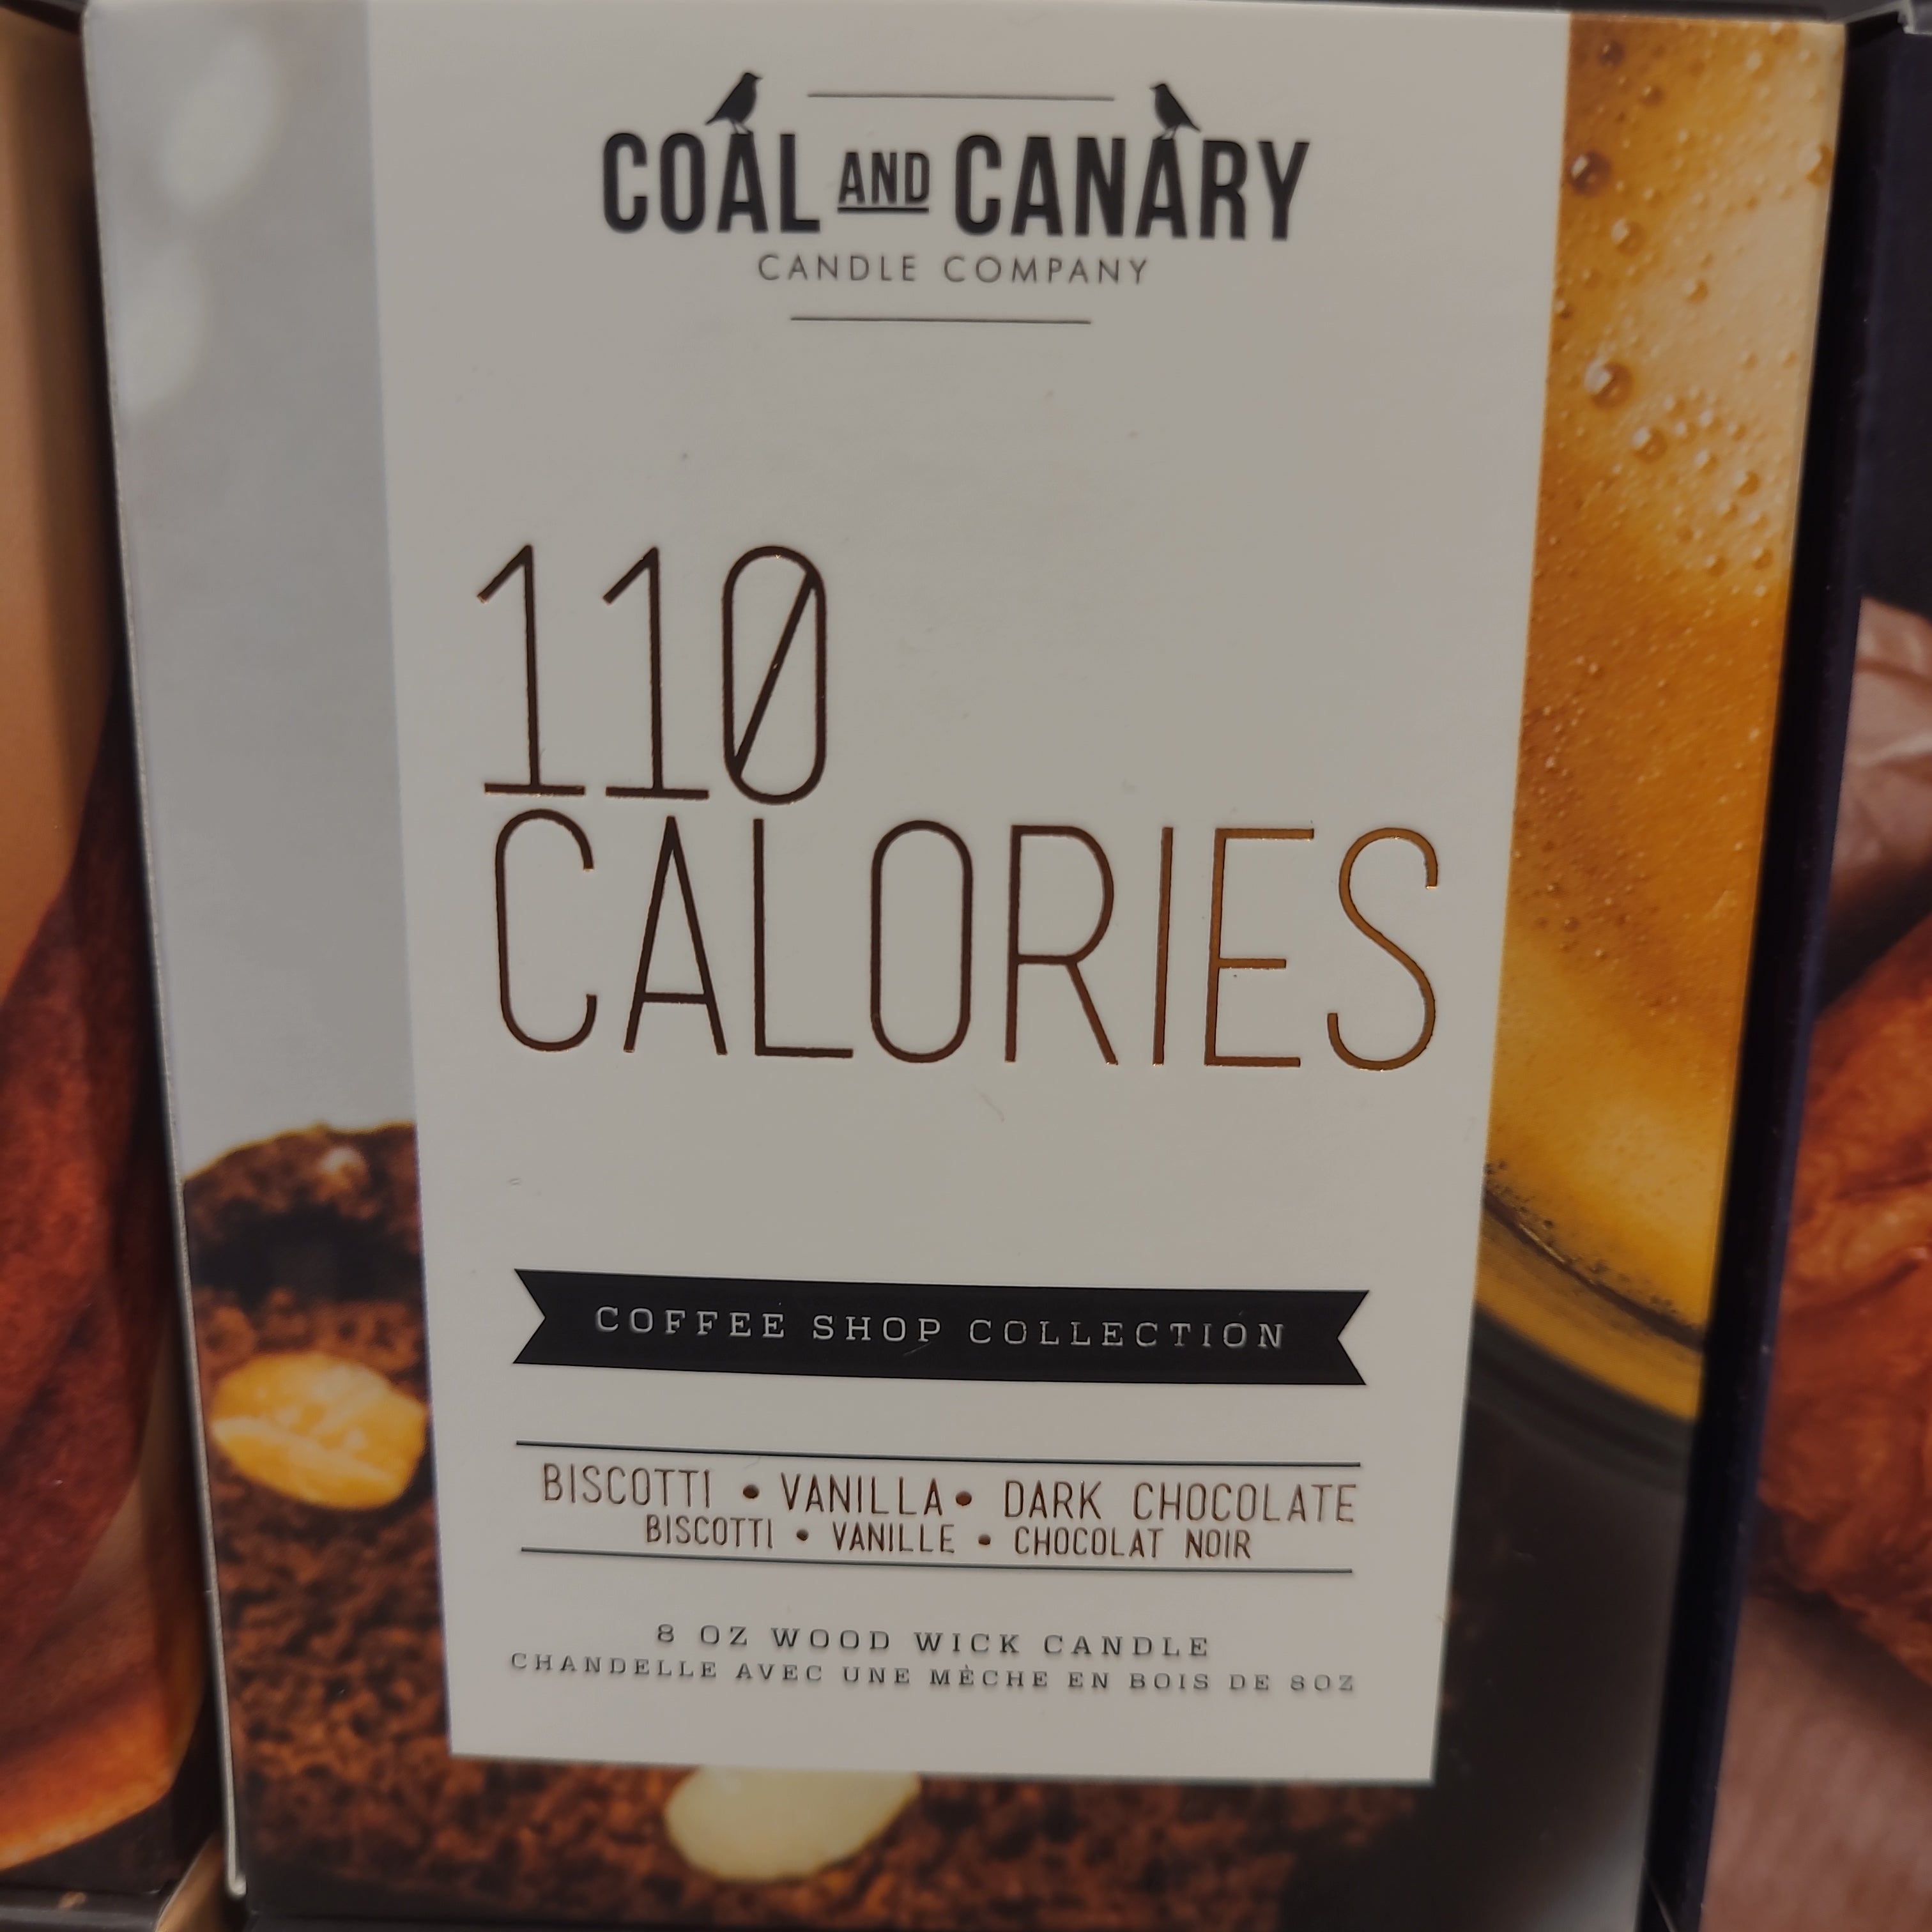 Coal and canary - 110 calories